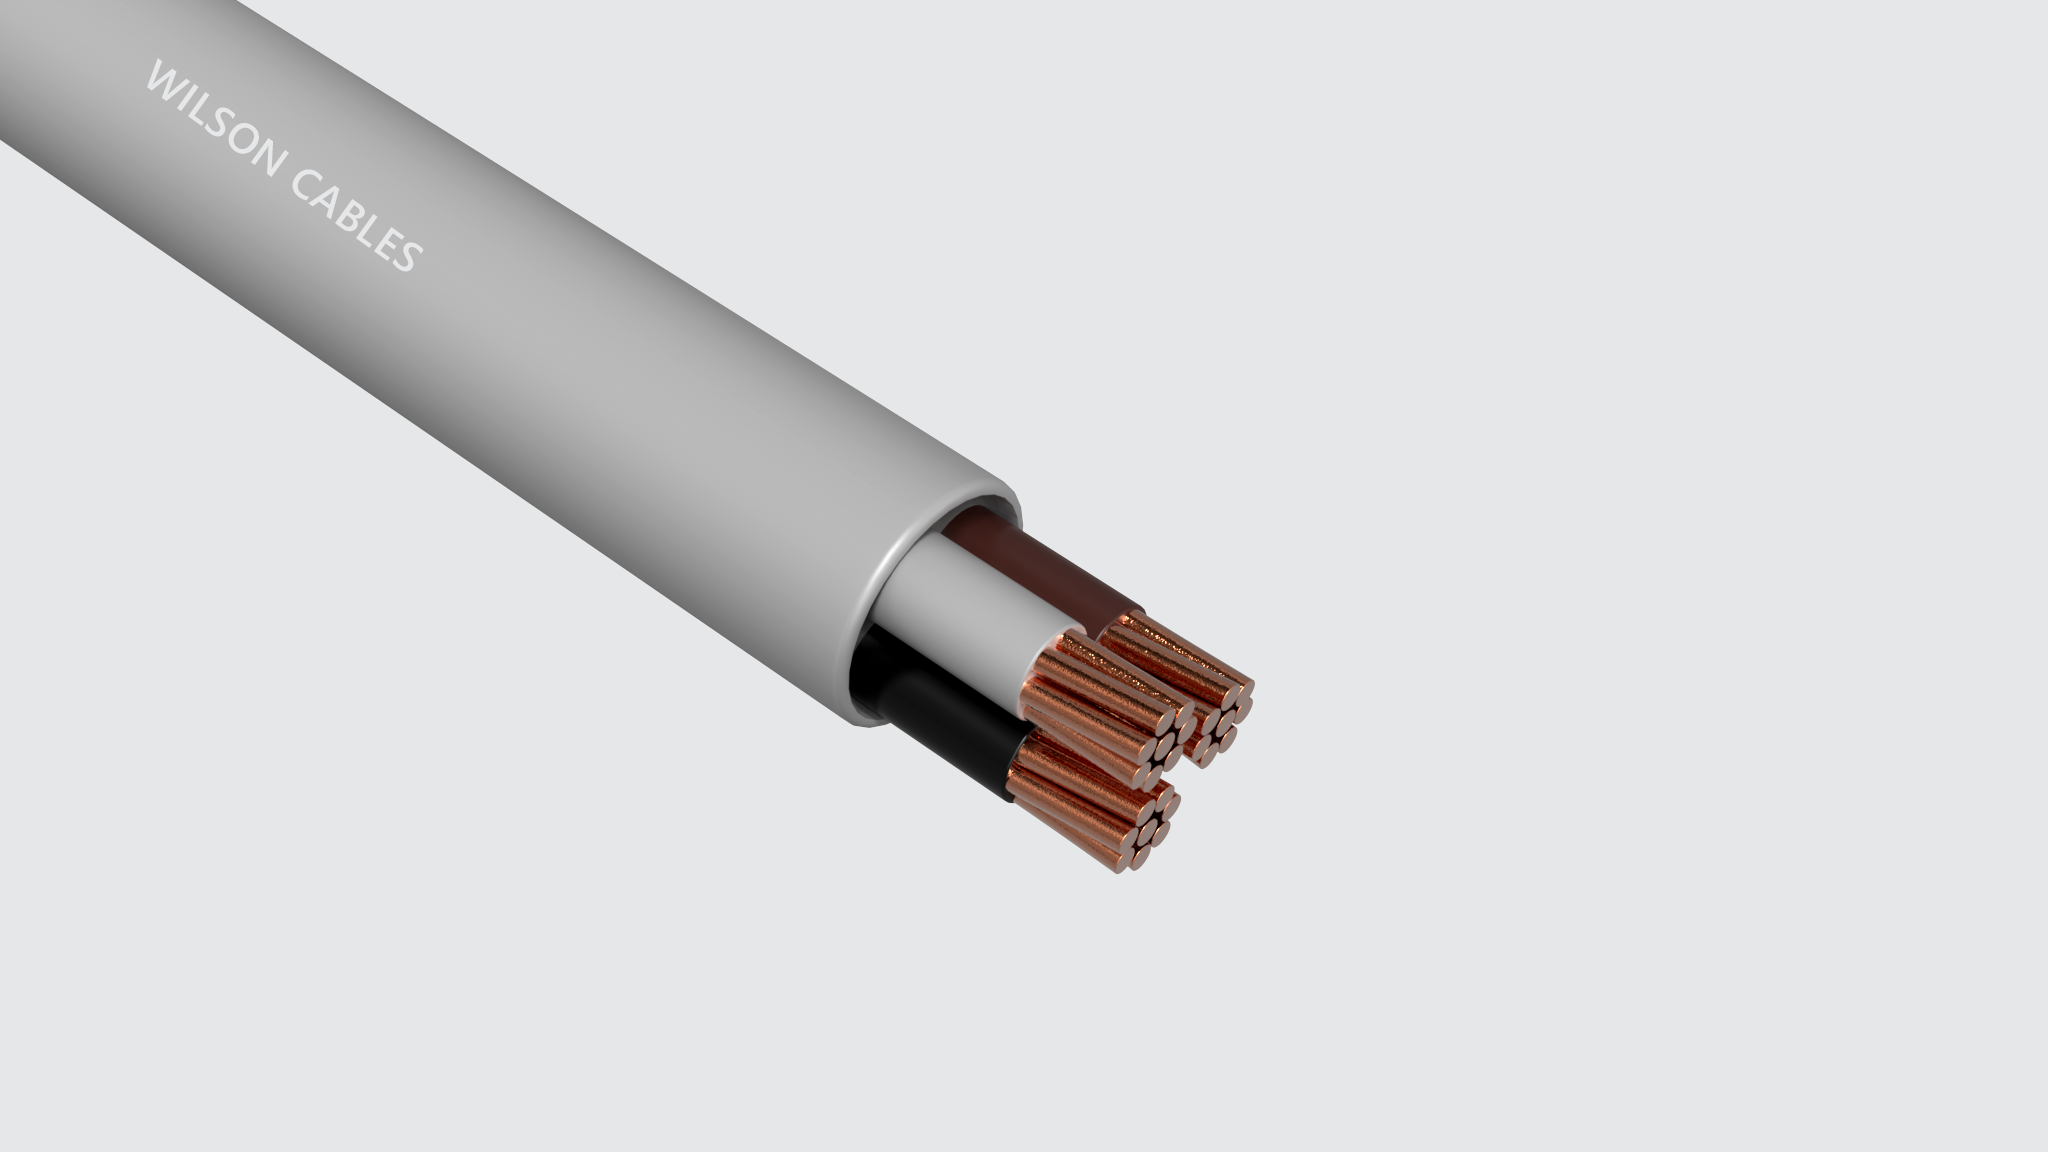 MC-210 PVC Sheathed Shipboard Power Cables